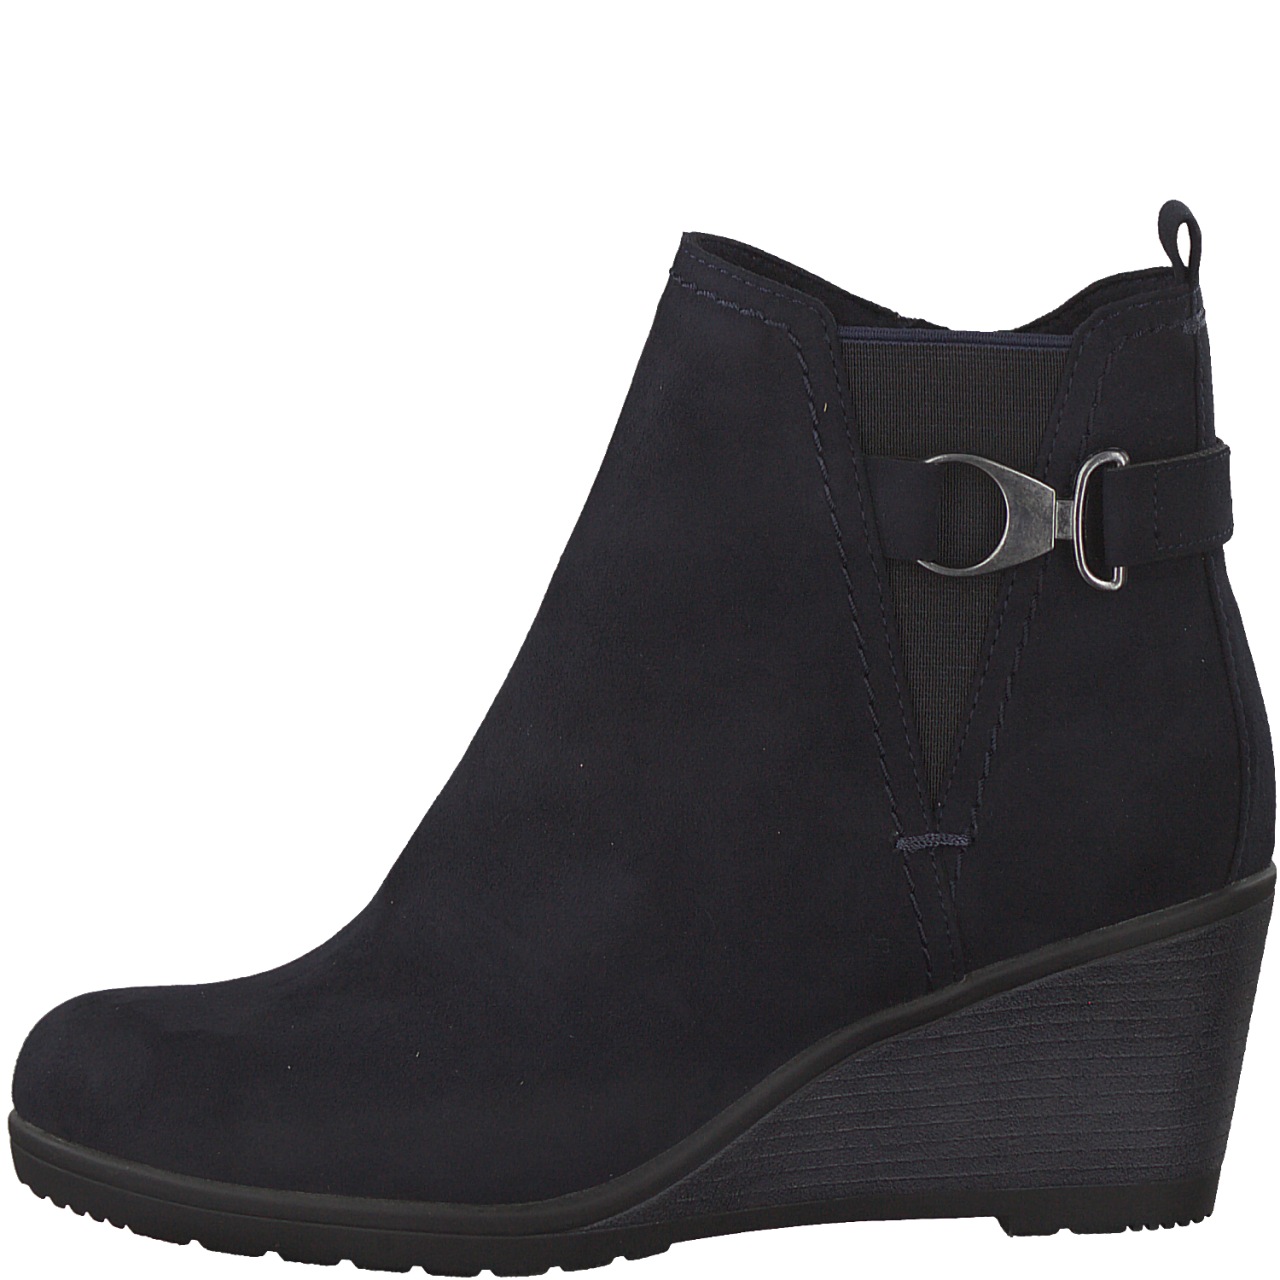 navy ankle boot